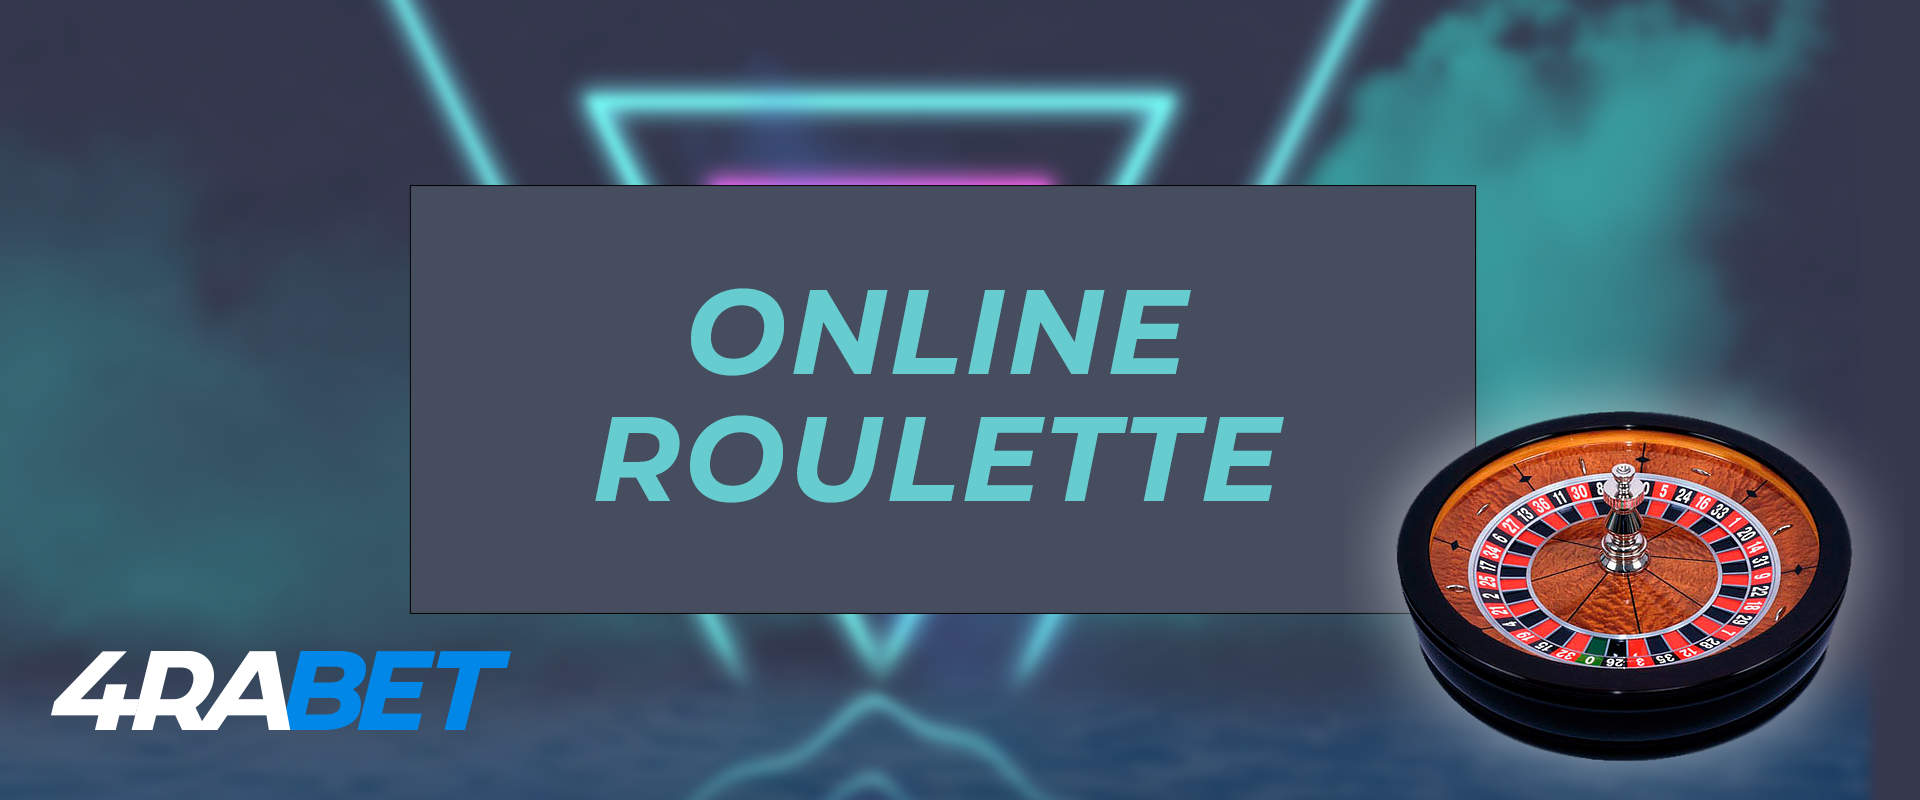 General information about the online roulette on the 4rabet site.